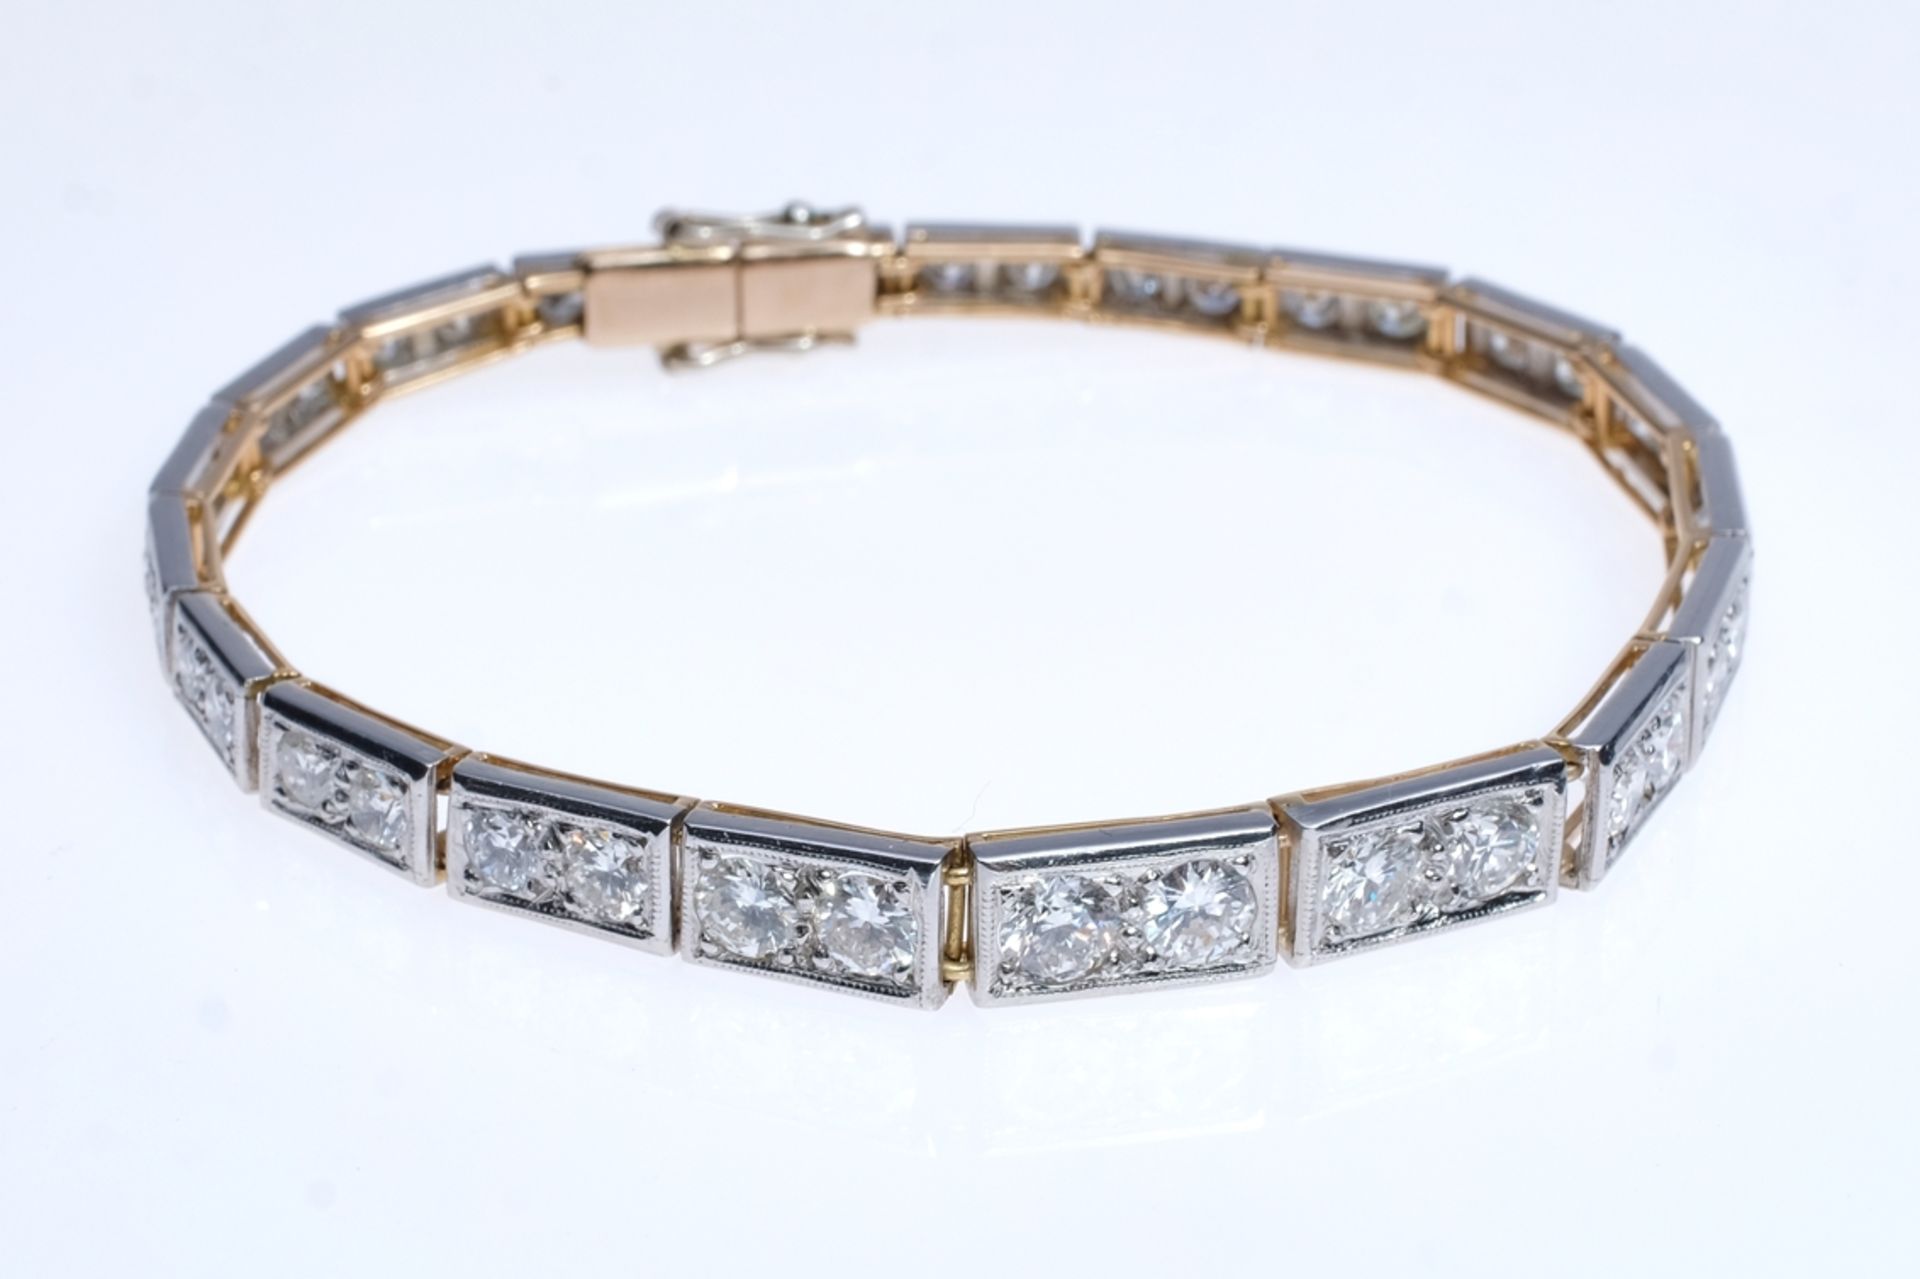 Bracelet, curved shape, 20 rectangular links, set with a total of 40 brilliant-cut diamonds (one br